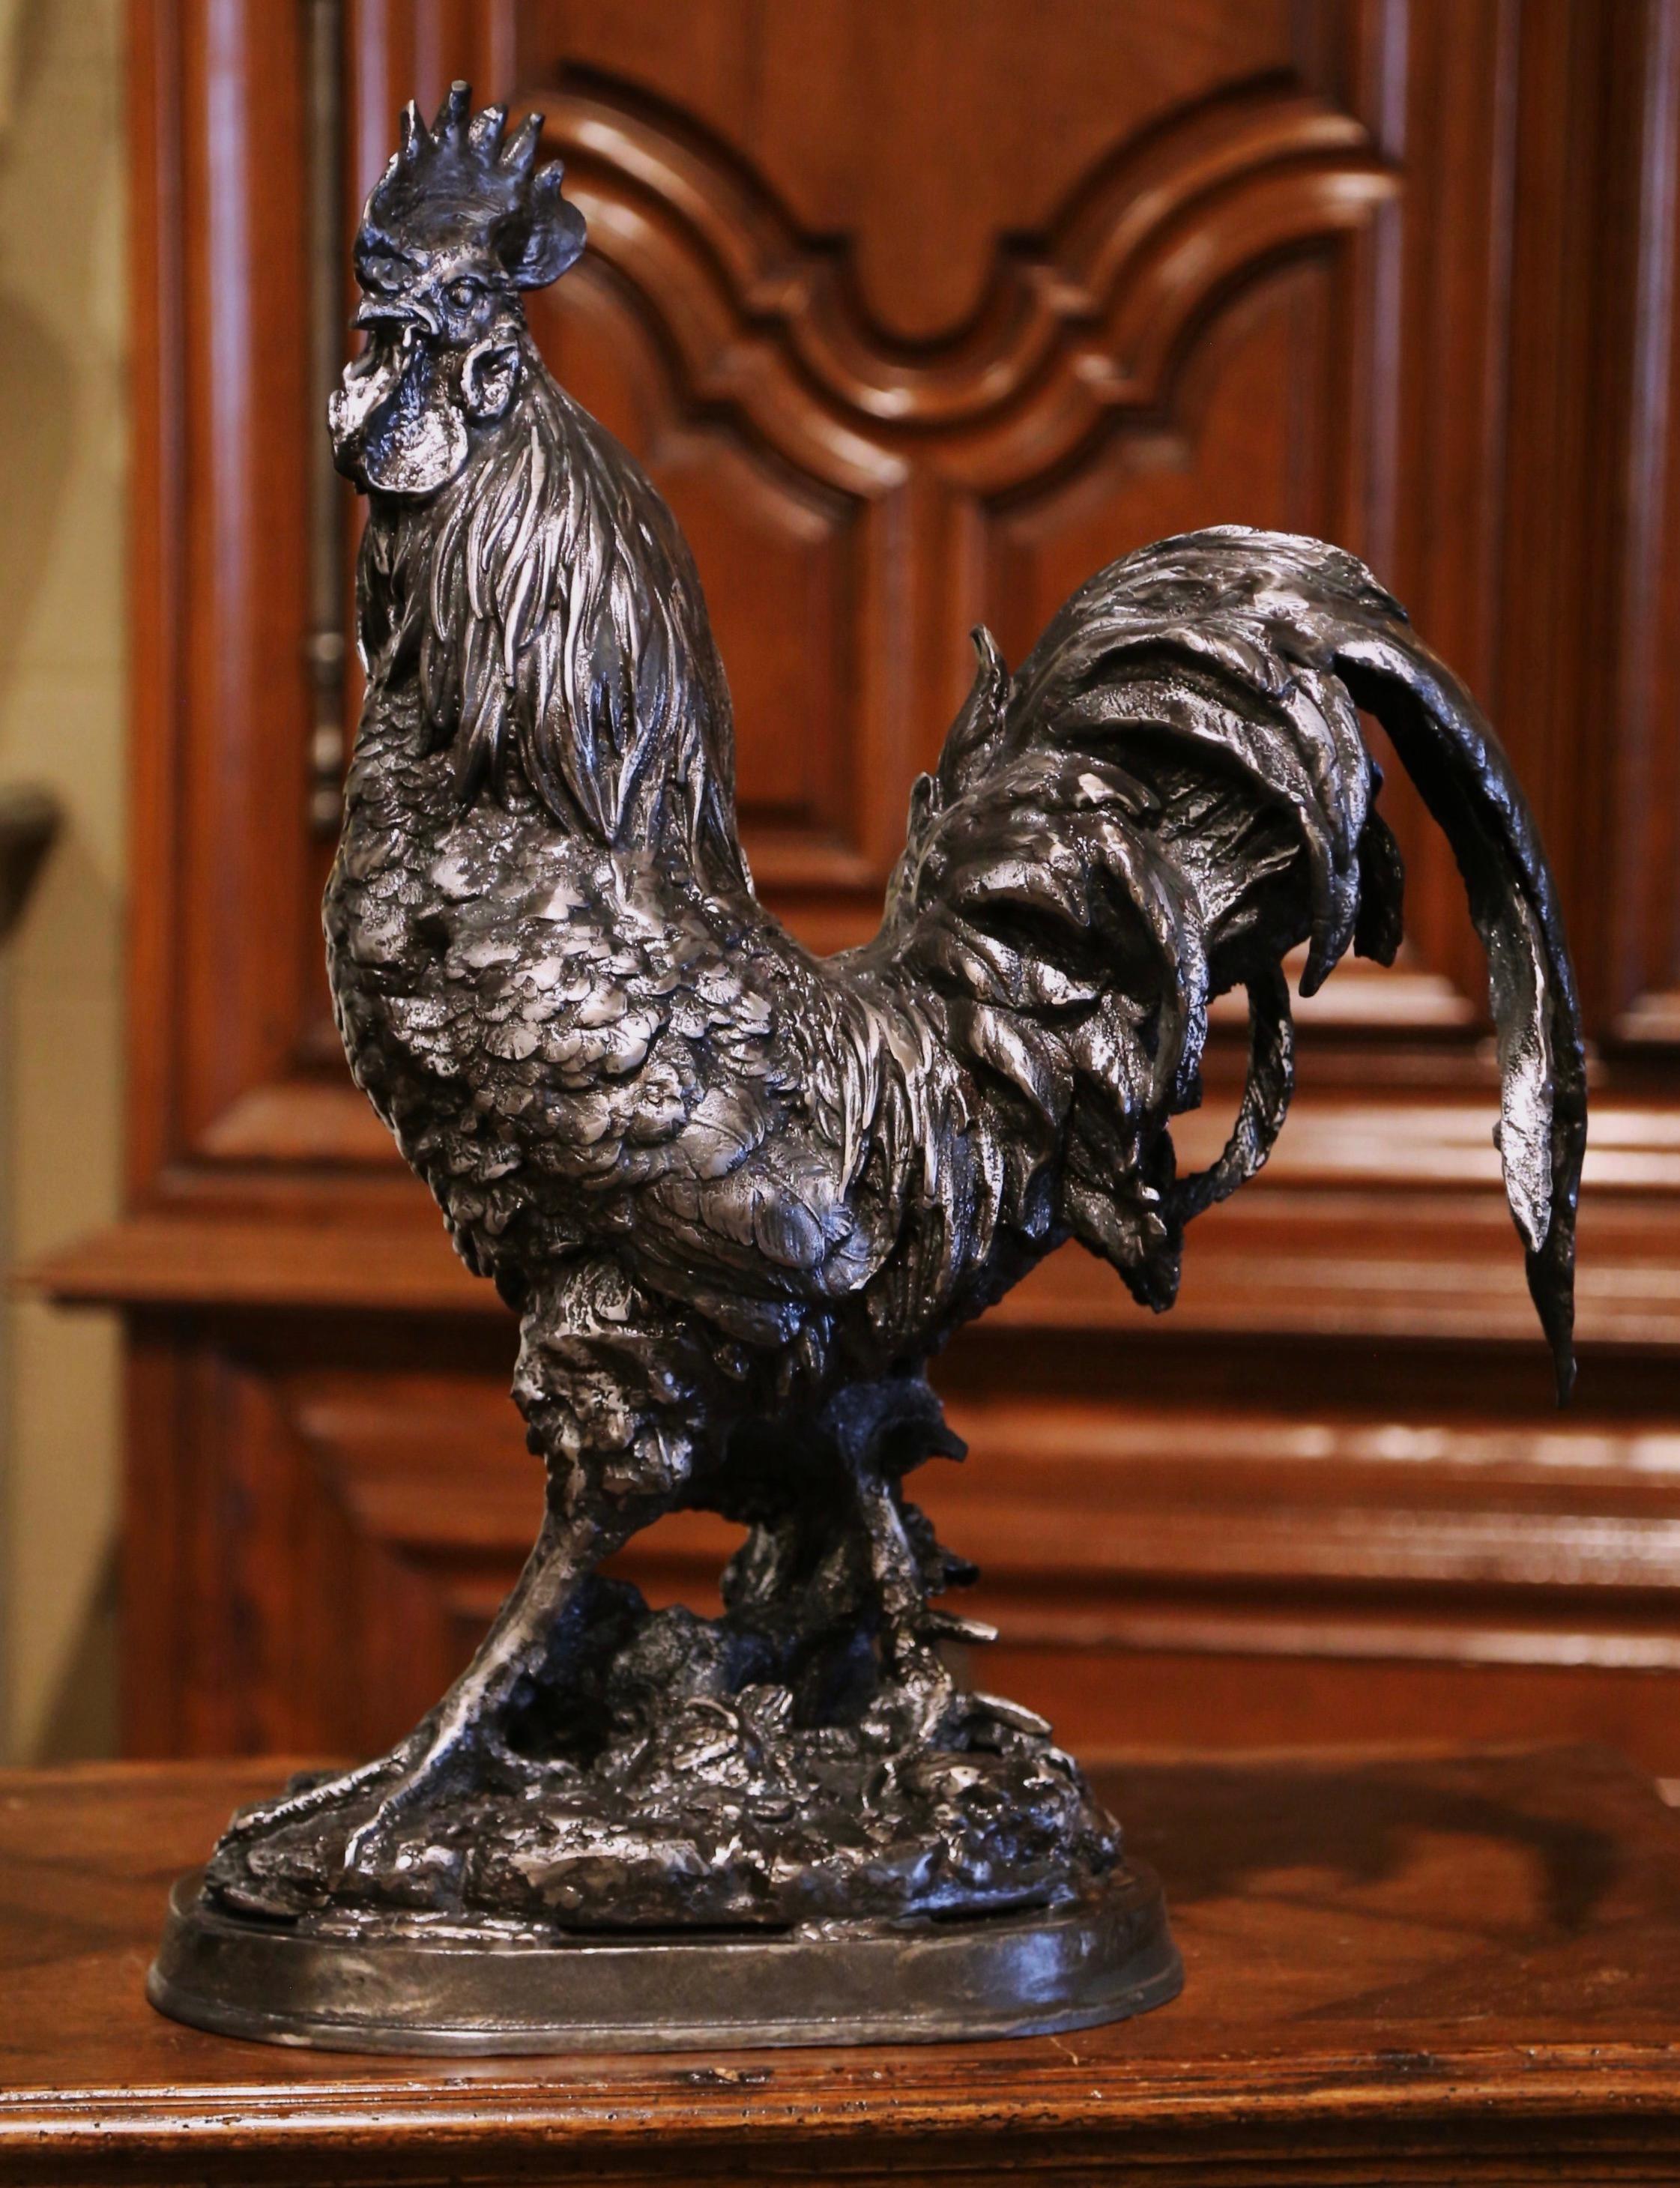 Early 20th Century French Polished Steel Iron Rooster Sculpture In Excellent Condition For Sale In Dallas, TX